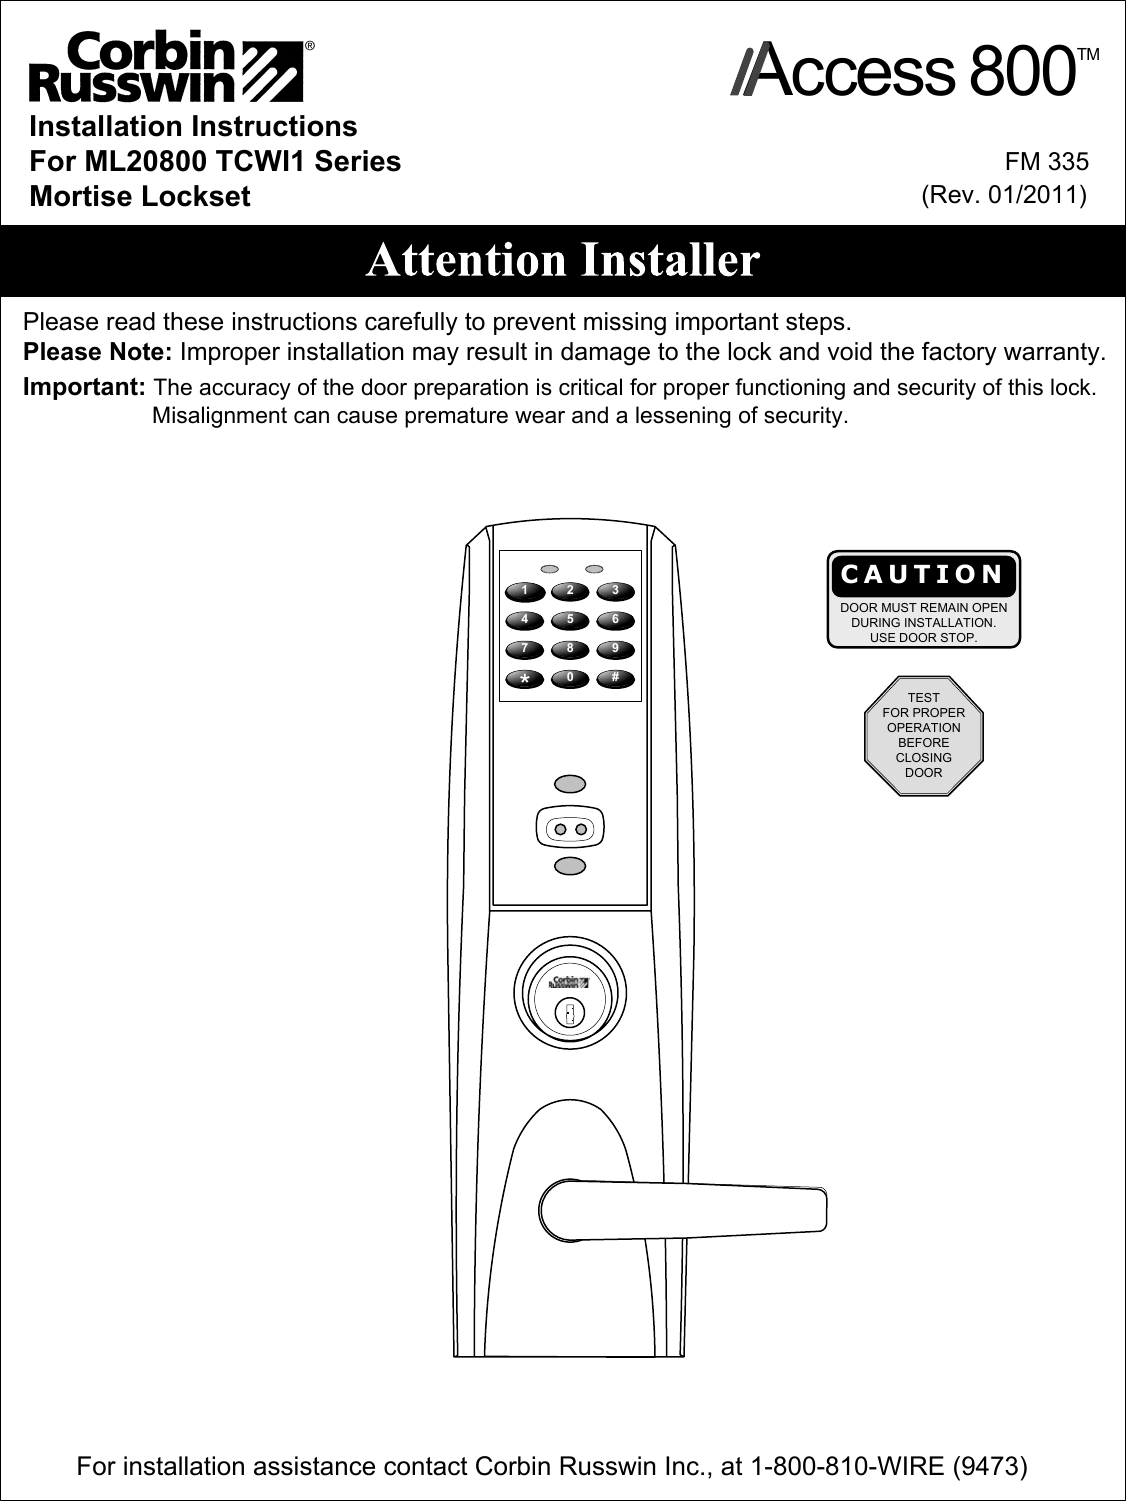 Installation InstructionsFor ML20800 TCWI1 SeriesMortise LocksetImportant: The accuracy of the door preparation is critical for proper functioning and security of this lock.                    Misalignment can cause premature wear and a lessening of security. Please read these instructions carefully to prevent missing important steps.Please Note: Improper installation may result in damage to the lock and void the factory warranty.            FM 335(Rev. 01/2011)For installation assistance contact Corbin Russwin Inc., at 1-800-810-WIRE (9473) CAUTIONDOOR MUST REMAIN OPENDURING INSTALLATION.USE DOOR STOP.1 2 34758069#*TESTFOR PROPEROPERATIONBEFORECLOSINGDOORAccess 800TM